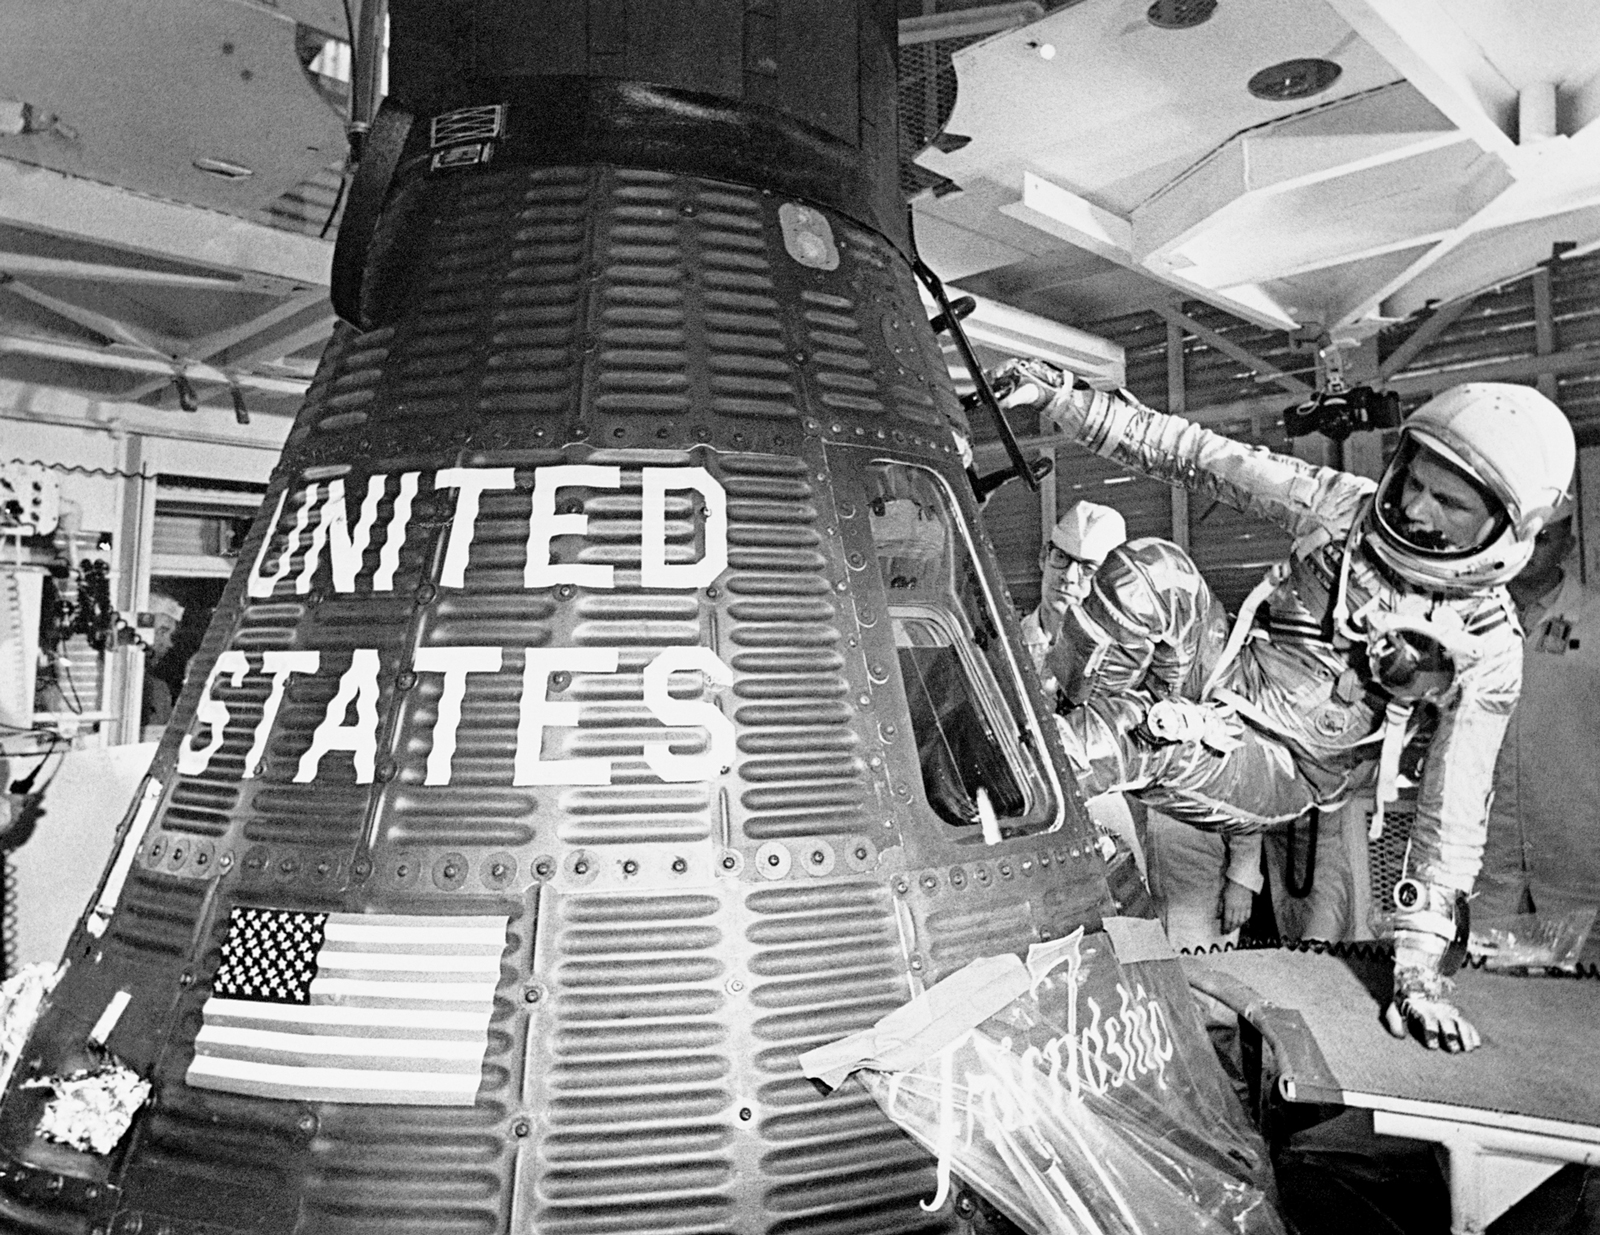 John Glenn boards the Friendship 7 capsule to become the first American to orbit the earth, during the Mercury-Atlas 6) mission, on Feb. 20, 1962.